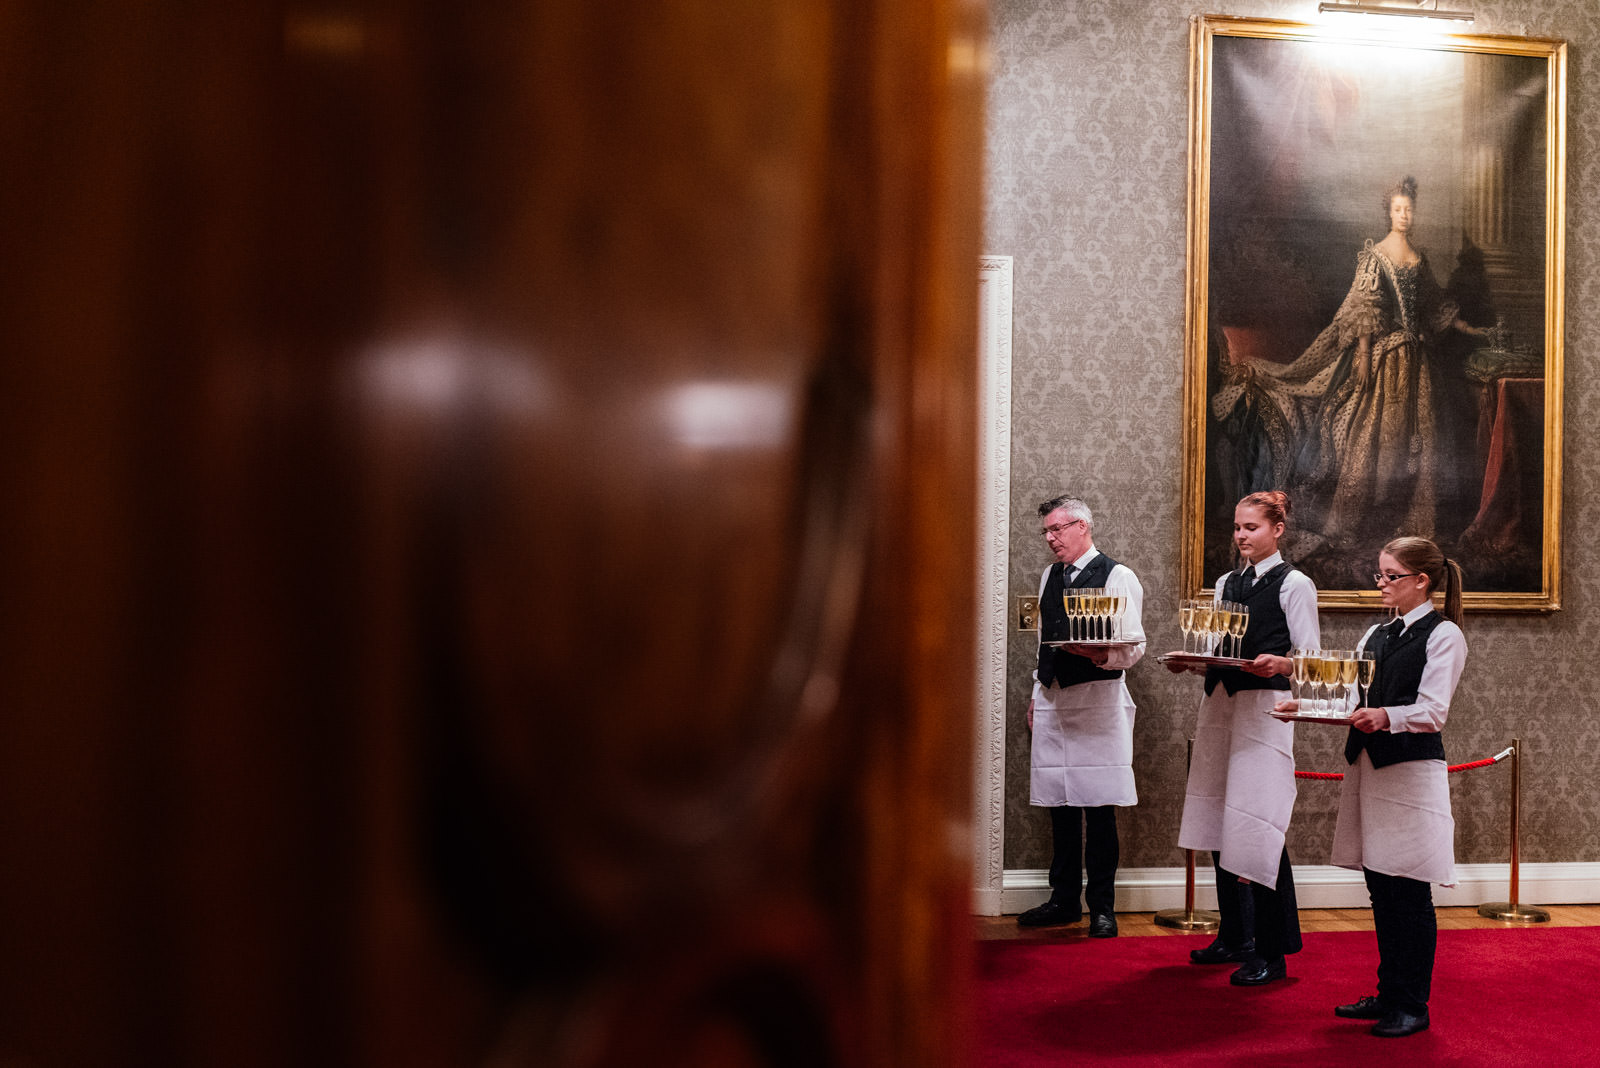 Waiting staff at Hedsor House wedding